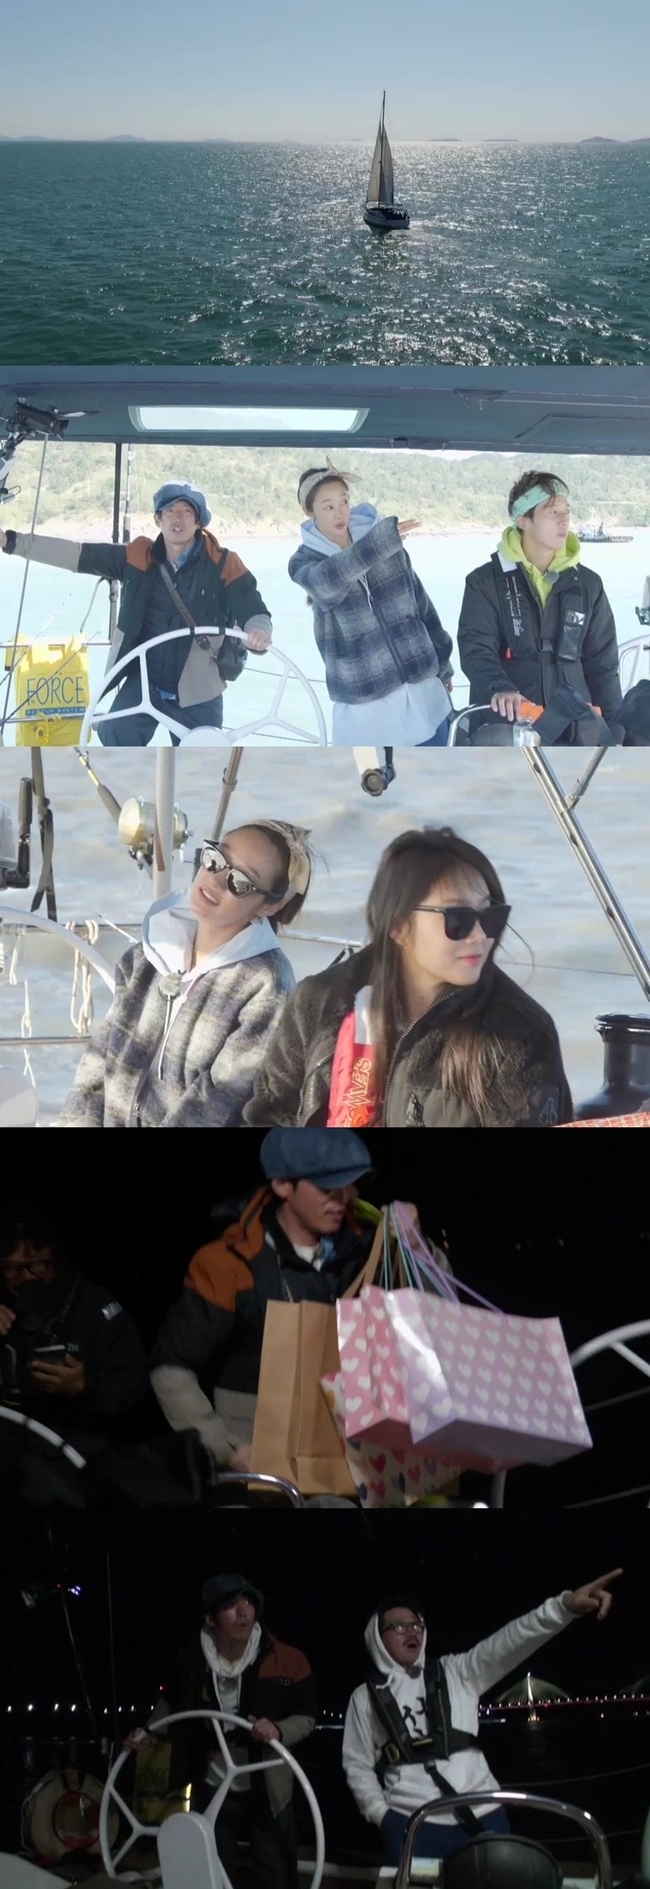 The West Coast of the United States will be completed.The final episode of MBC Everlons Yacht Expedition: The Power Rangers (hereinafter referred to as Yacht Expedition) will feature the final story of the voyage of Jang Hyuk - Heo Kyung-hwan - Choi Yeo-jin - Soyou.The journey of the Yacht Expedition, which departed from Incheon and came to Sanggong-do, Shinjin Port, Eocheongdo, Kappo Port and massage, leaves only the voyage to Mokpo Port.The Yacht Expedition, which conveyed the beauty of the West Sea and the charm of hidden islands, added to the fantasy chemistry of Jang Hyuk, Heo Kyung-hwan, Choi Yeo-jin and Soyou Yoti 4 Brothers, which gave viewers pleasure.The meeting of four people, which was unexpected enough to call even the members unexpected combination, became one on the yacht and created the best chemistry.On the sea, far from the land, the four of them turned to each other and became Yoti and became Yoti.On the last voyage, the four will have time to share their feelings and memories while doing the Yot Expedition.The four people in the public photos are talking about their prepared Gifts. Soyou is impressed by Choi Yeo-jins unexpected Gift.Choi Yeo-jin also added to the question by saying that he conveys his heart with a hand letter written while doing night watch (unbreakable).Heo Kyung-hwan took a gift from the purchase package, and Jang Hyuk took out a gift with different scales from size to scale, amplifying everyones curiosity.There is a growing interest in what the yachts Gifts are prepared for each other.The yacht expedition is expected to be completed safely by the end of the voyage. The yacht expedition is in an emergency with Mokpo Port in front of its nose.Choi Yeo-jin is really Variety, from start to finish, and Jang Hyuk is the back door that he could not put the tension on his face by shouting it is not really over.Can the Yacht Expedition return to the South without incident? (Provide Photos)